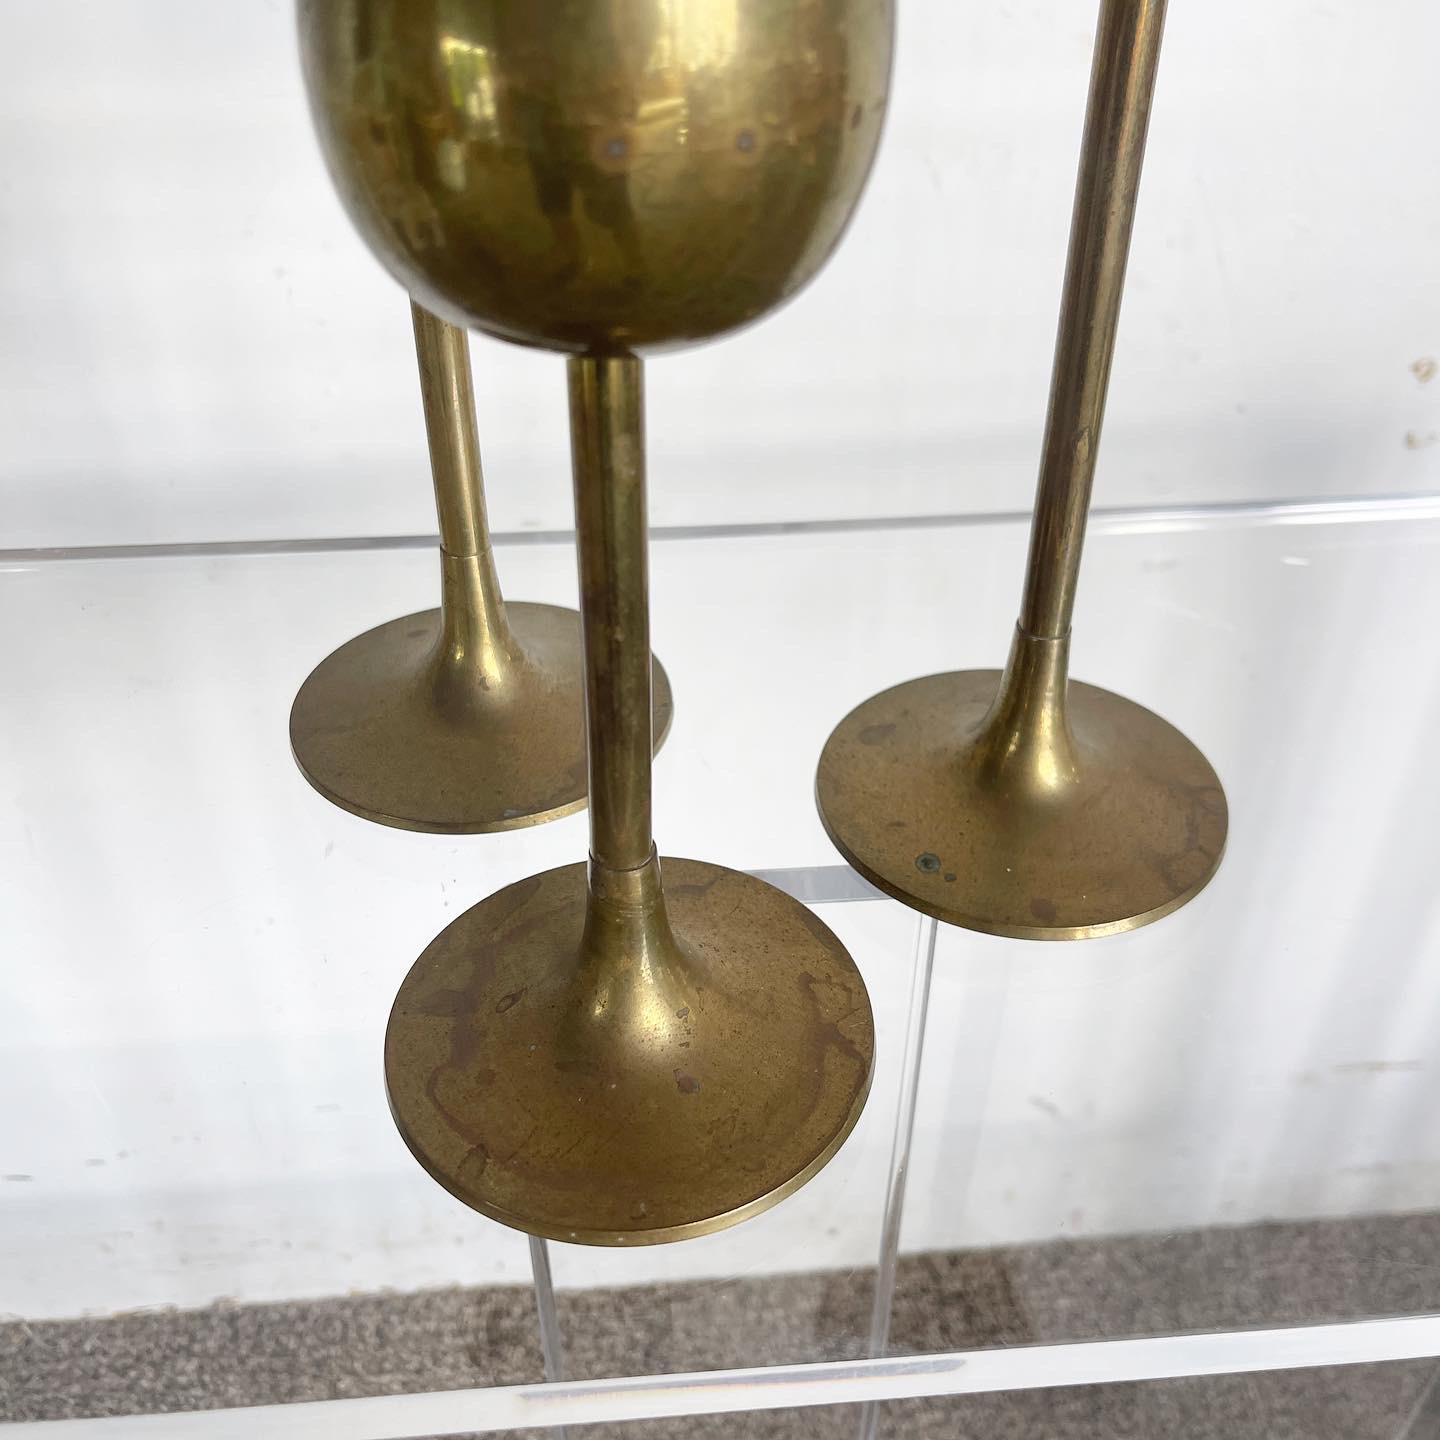 brass tulip candle holders